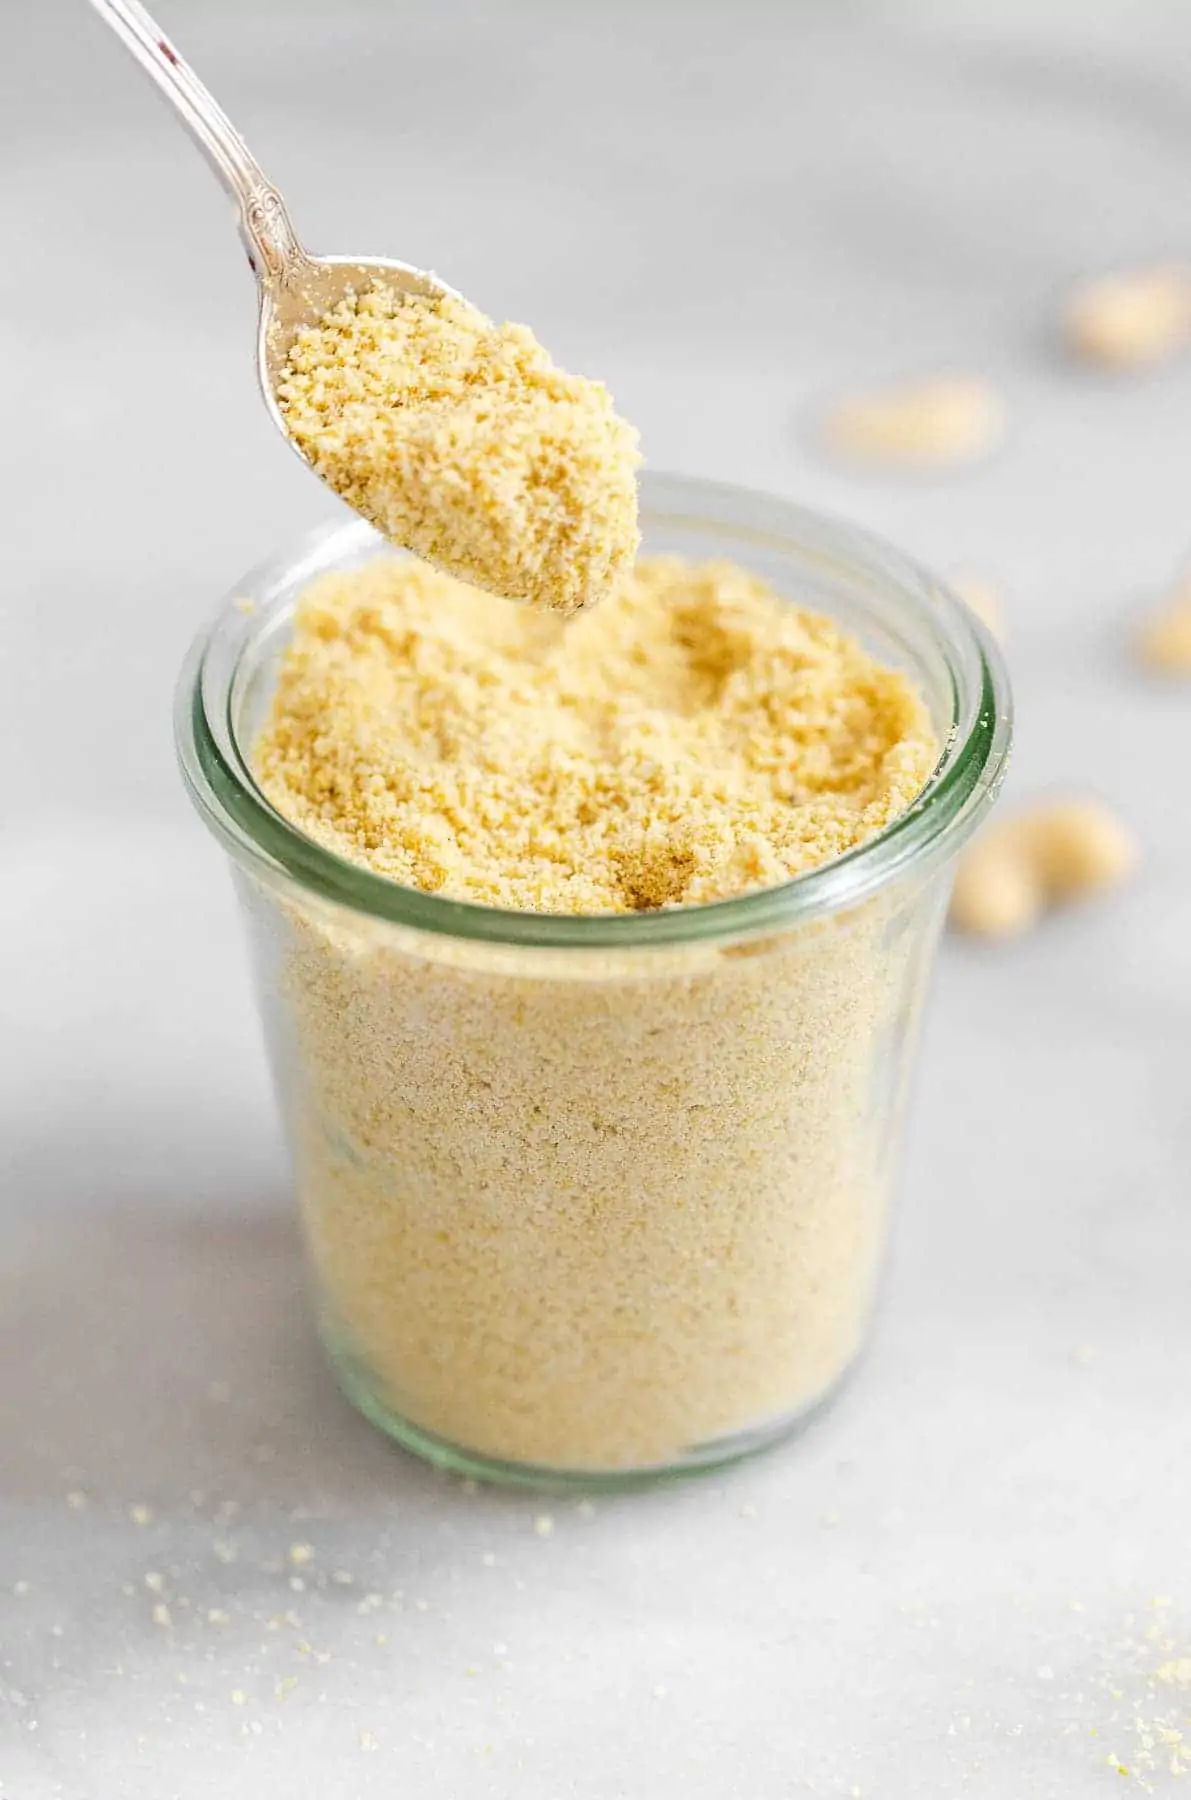 Cashew parmesan in a glass container with a spoon sprinkling it.